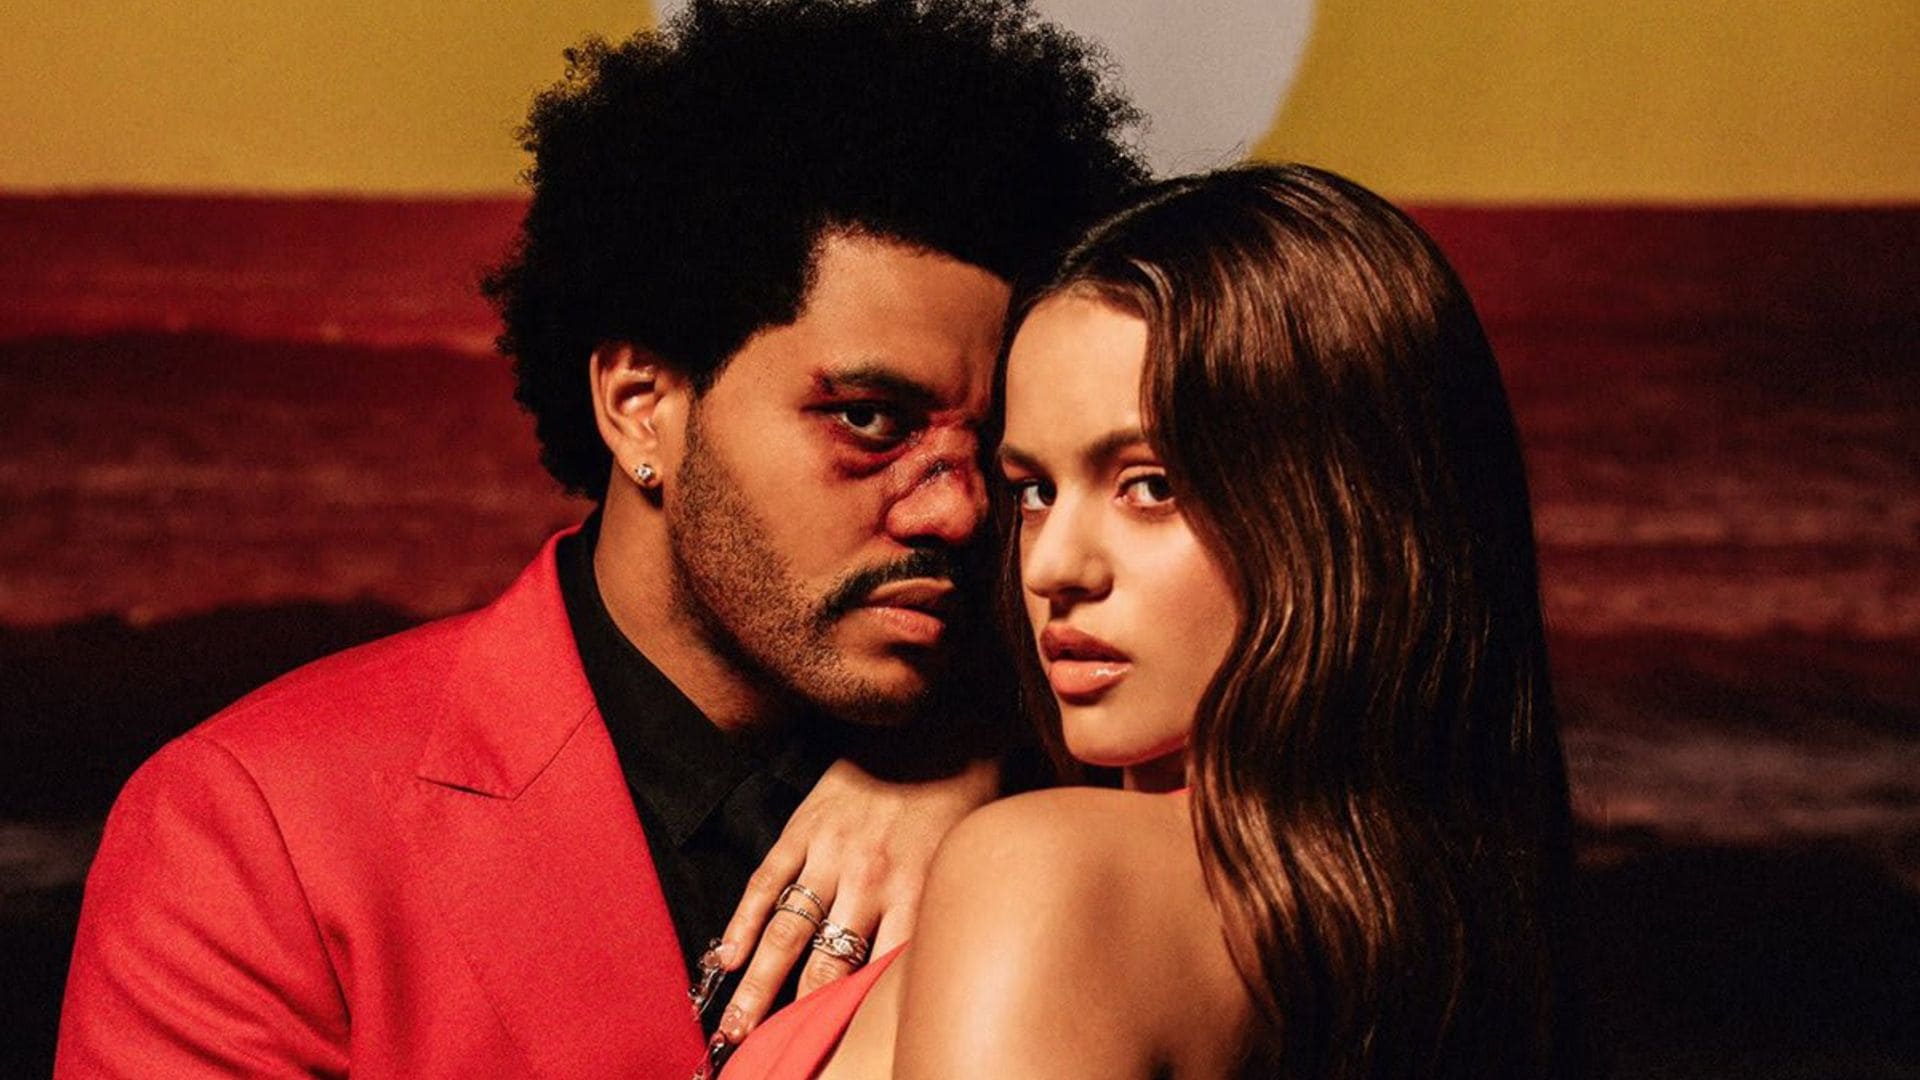 The Weeknd and Rosalia connect for "Blinding Lights" remix